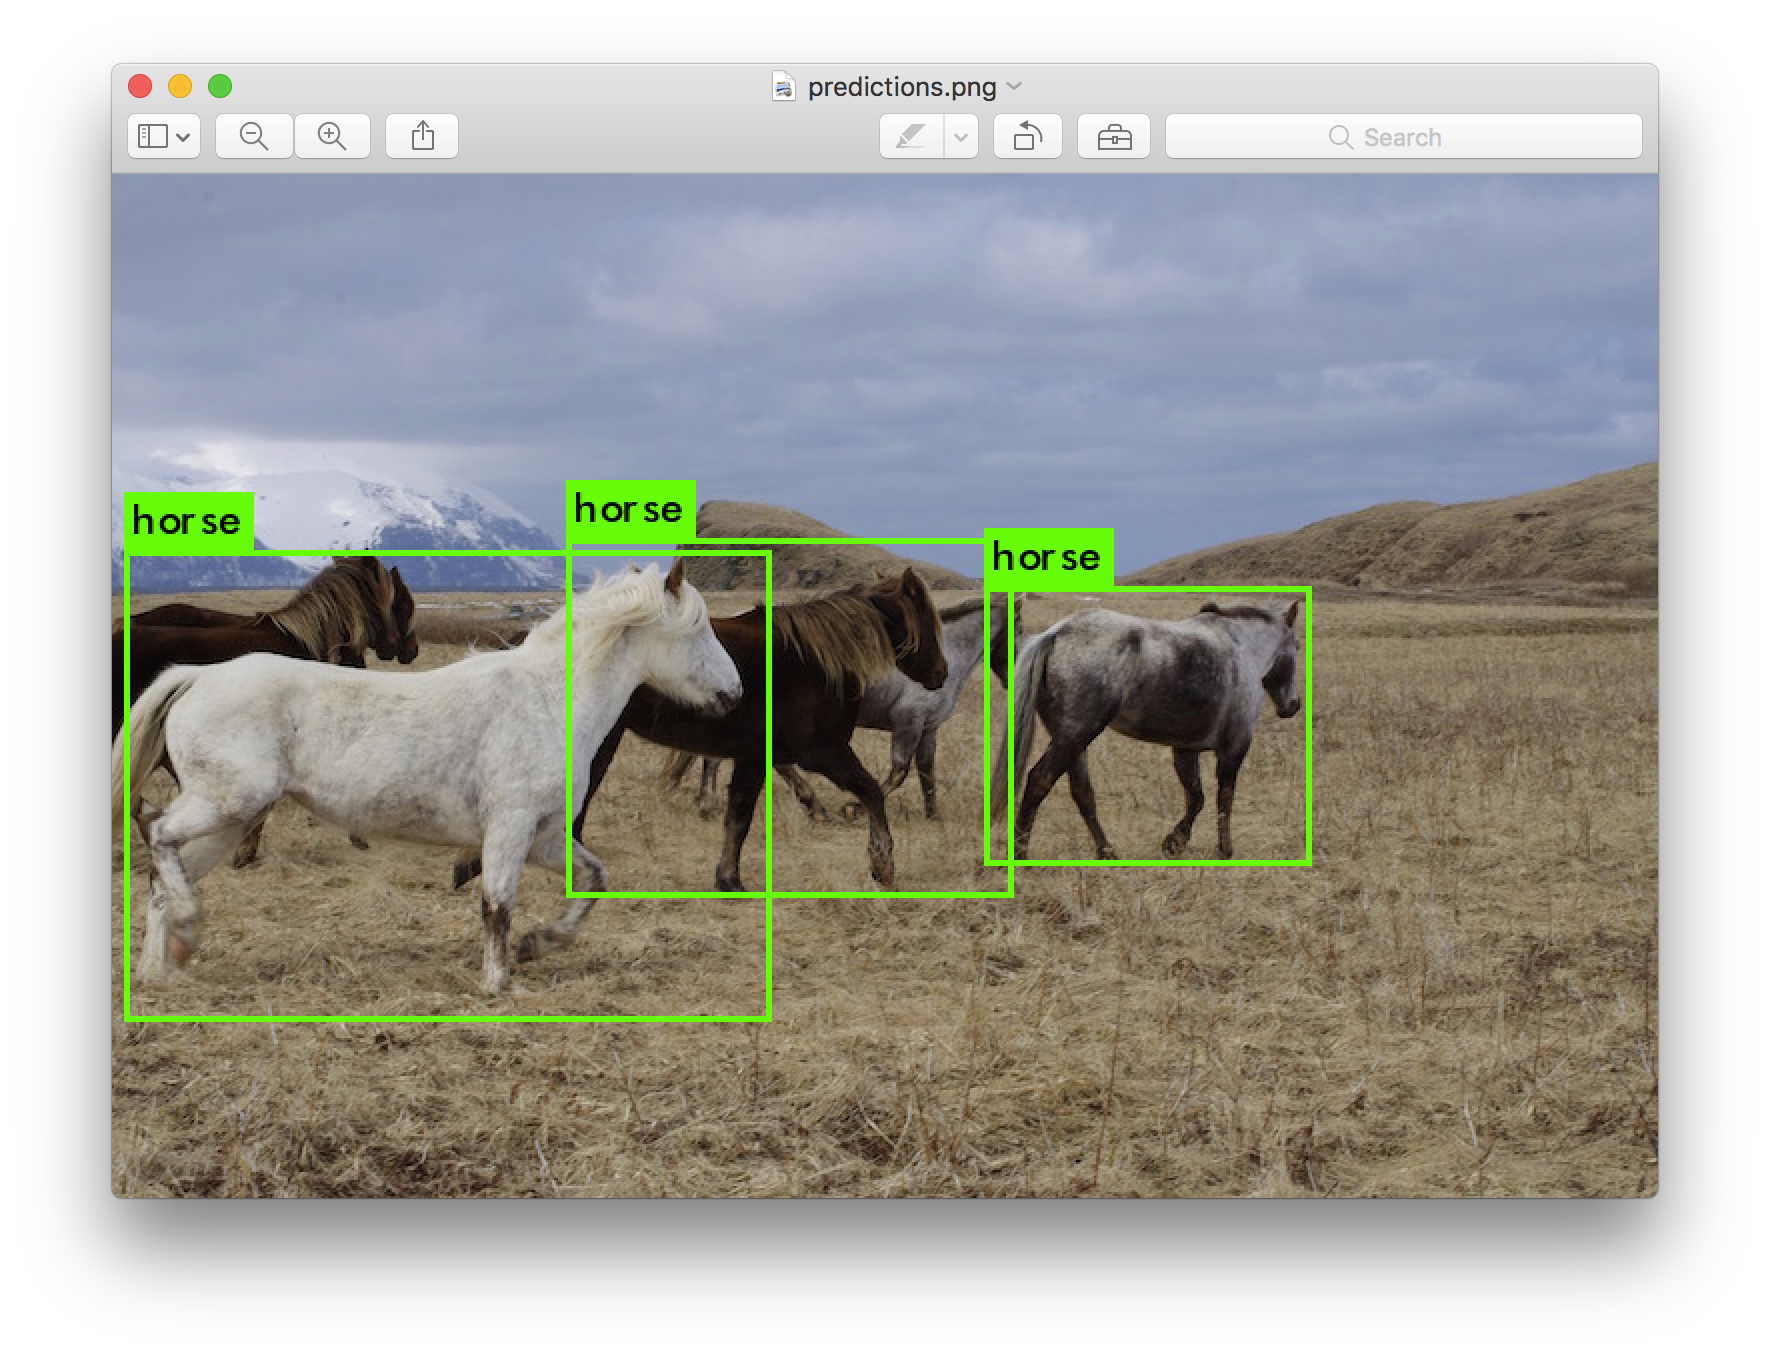 object detection